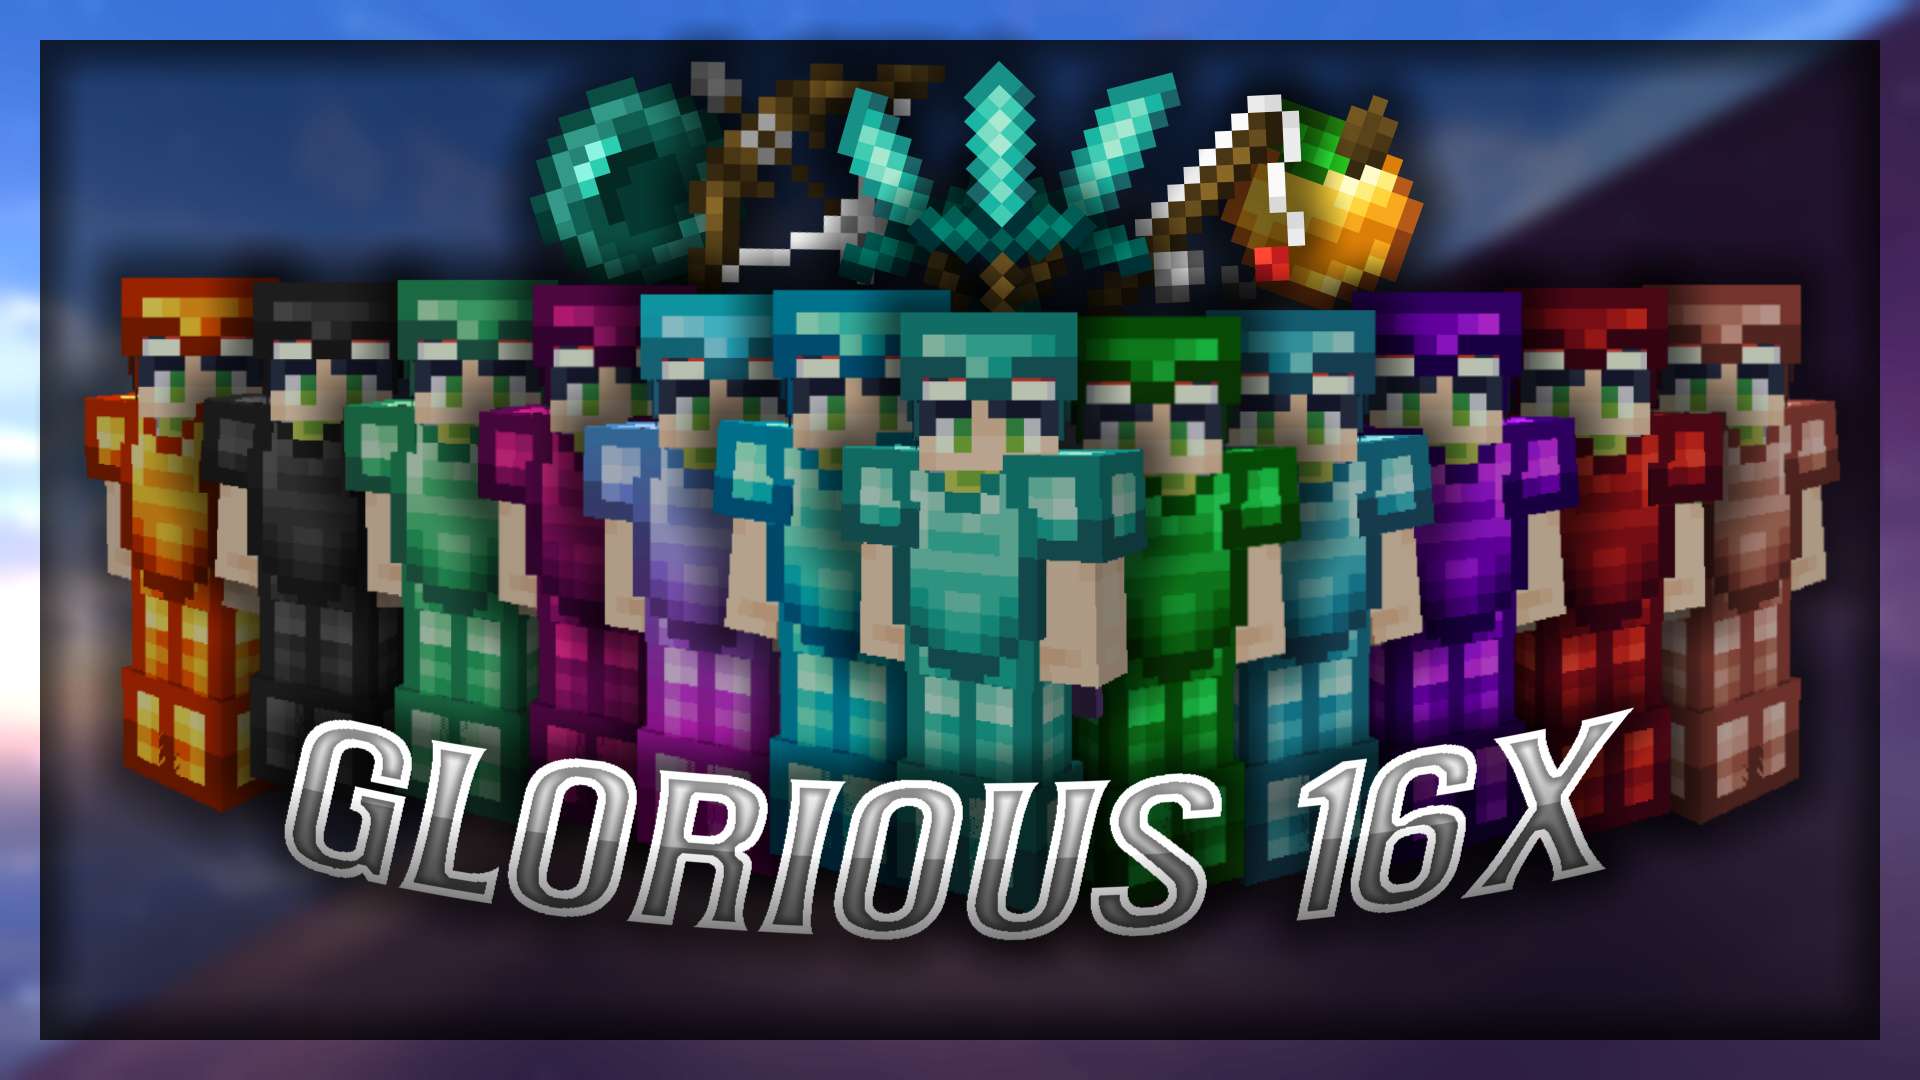 (open zip with WinRAR) Glorious - Pink 16 by Mek on PvPRP